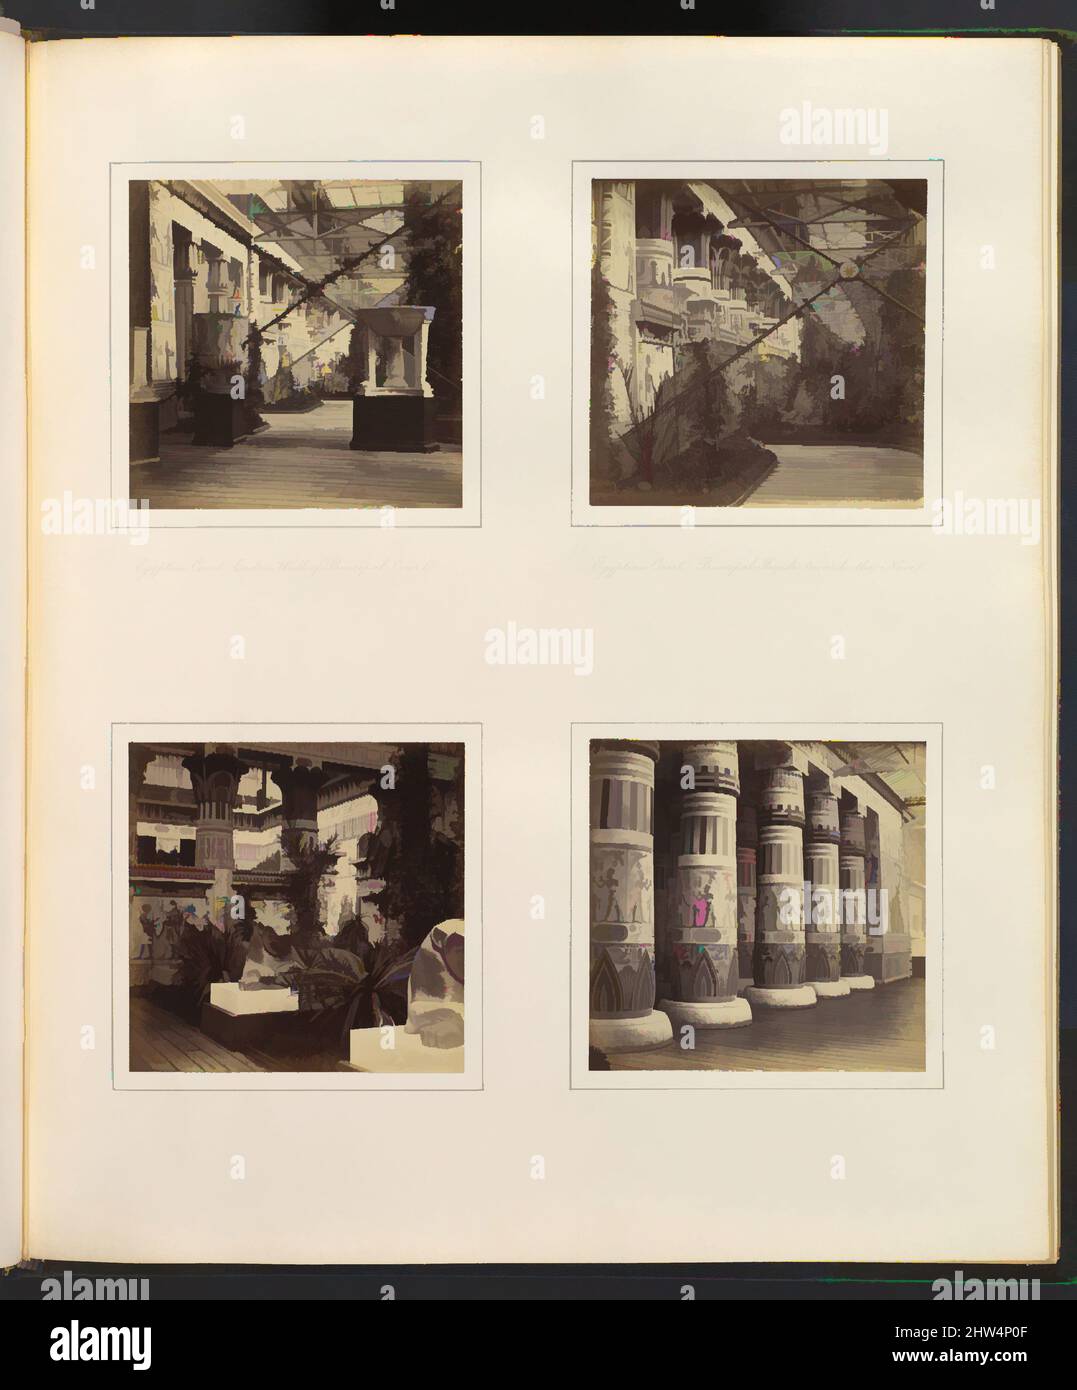 Art inspired by Egyptian Court, Eastern Wall of Principal Court; Egyptian Court, Principal Facade towards the Nave; Lions in the Egyptian Court; Colonnade Adorned with Egyptian Paintings, ca. 1859, Albumen silver print from glass negative, 7.9 x 8.1 cm (3 1/8 x 3 3/16 in.), each, Classic works modernized by Artotop with a splash of modernity. Shapes, color and value, eye-catching visual impact on art. Emotions through freedom of artworks in a contemporary way. A timeless message pursuing a wildly creative new direction. Artists turning to the digital medium and creating the Artotop NFT Stock Photo